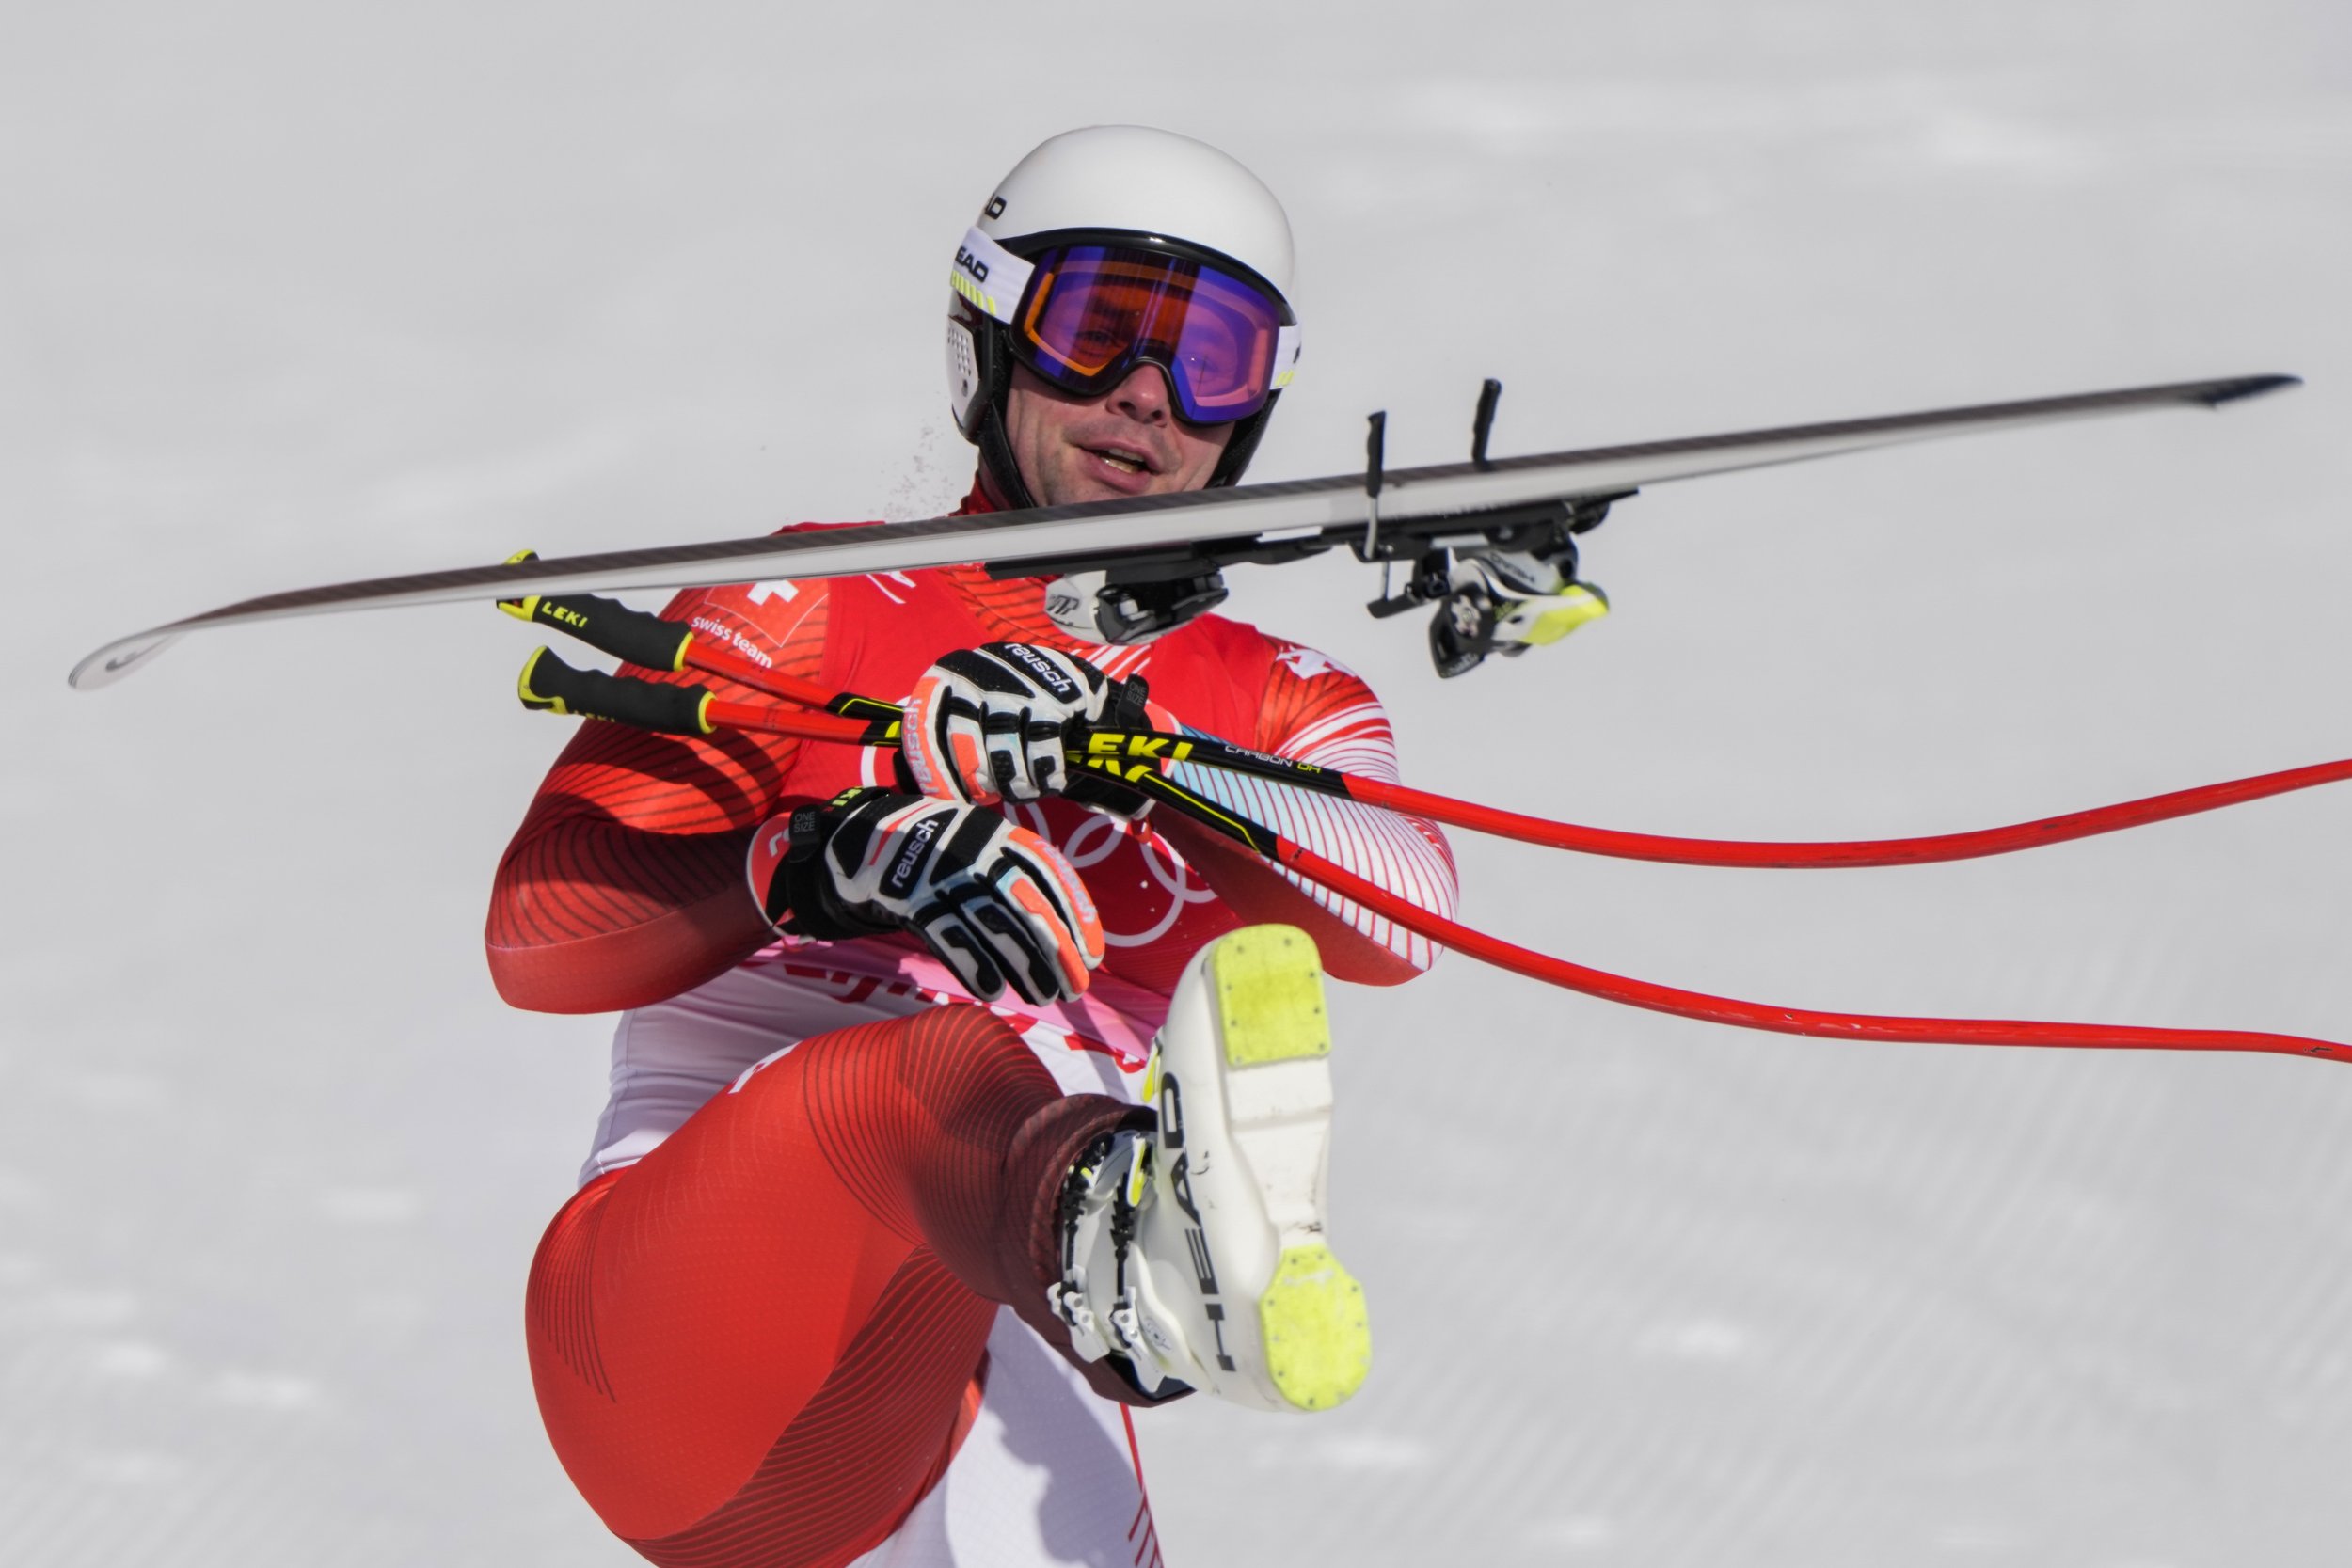  Beat Feuz, of Switzerland, kicks his ski after finishing the men's downhill at the 2022 Winter Olympics, Monday, Feb. 7, 2022, in the Yanqing district of Beijing. (AP Photo/Mark Schiefelbein) 